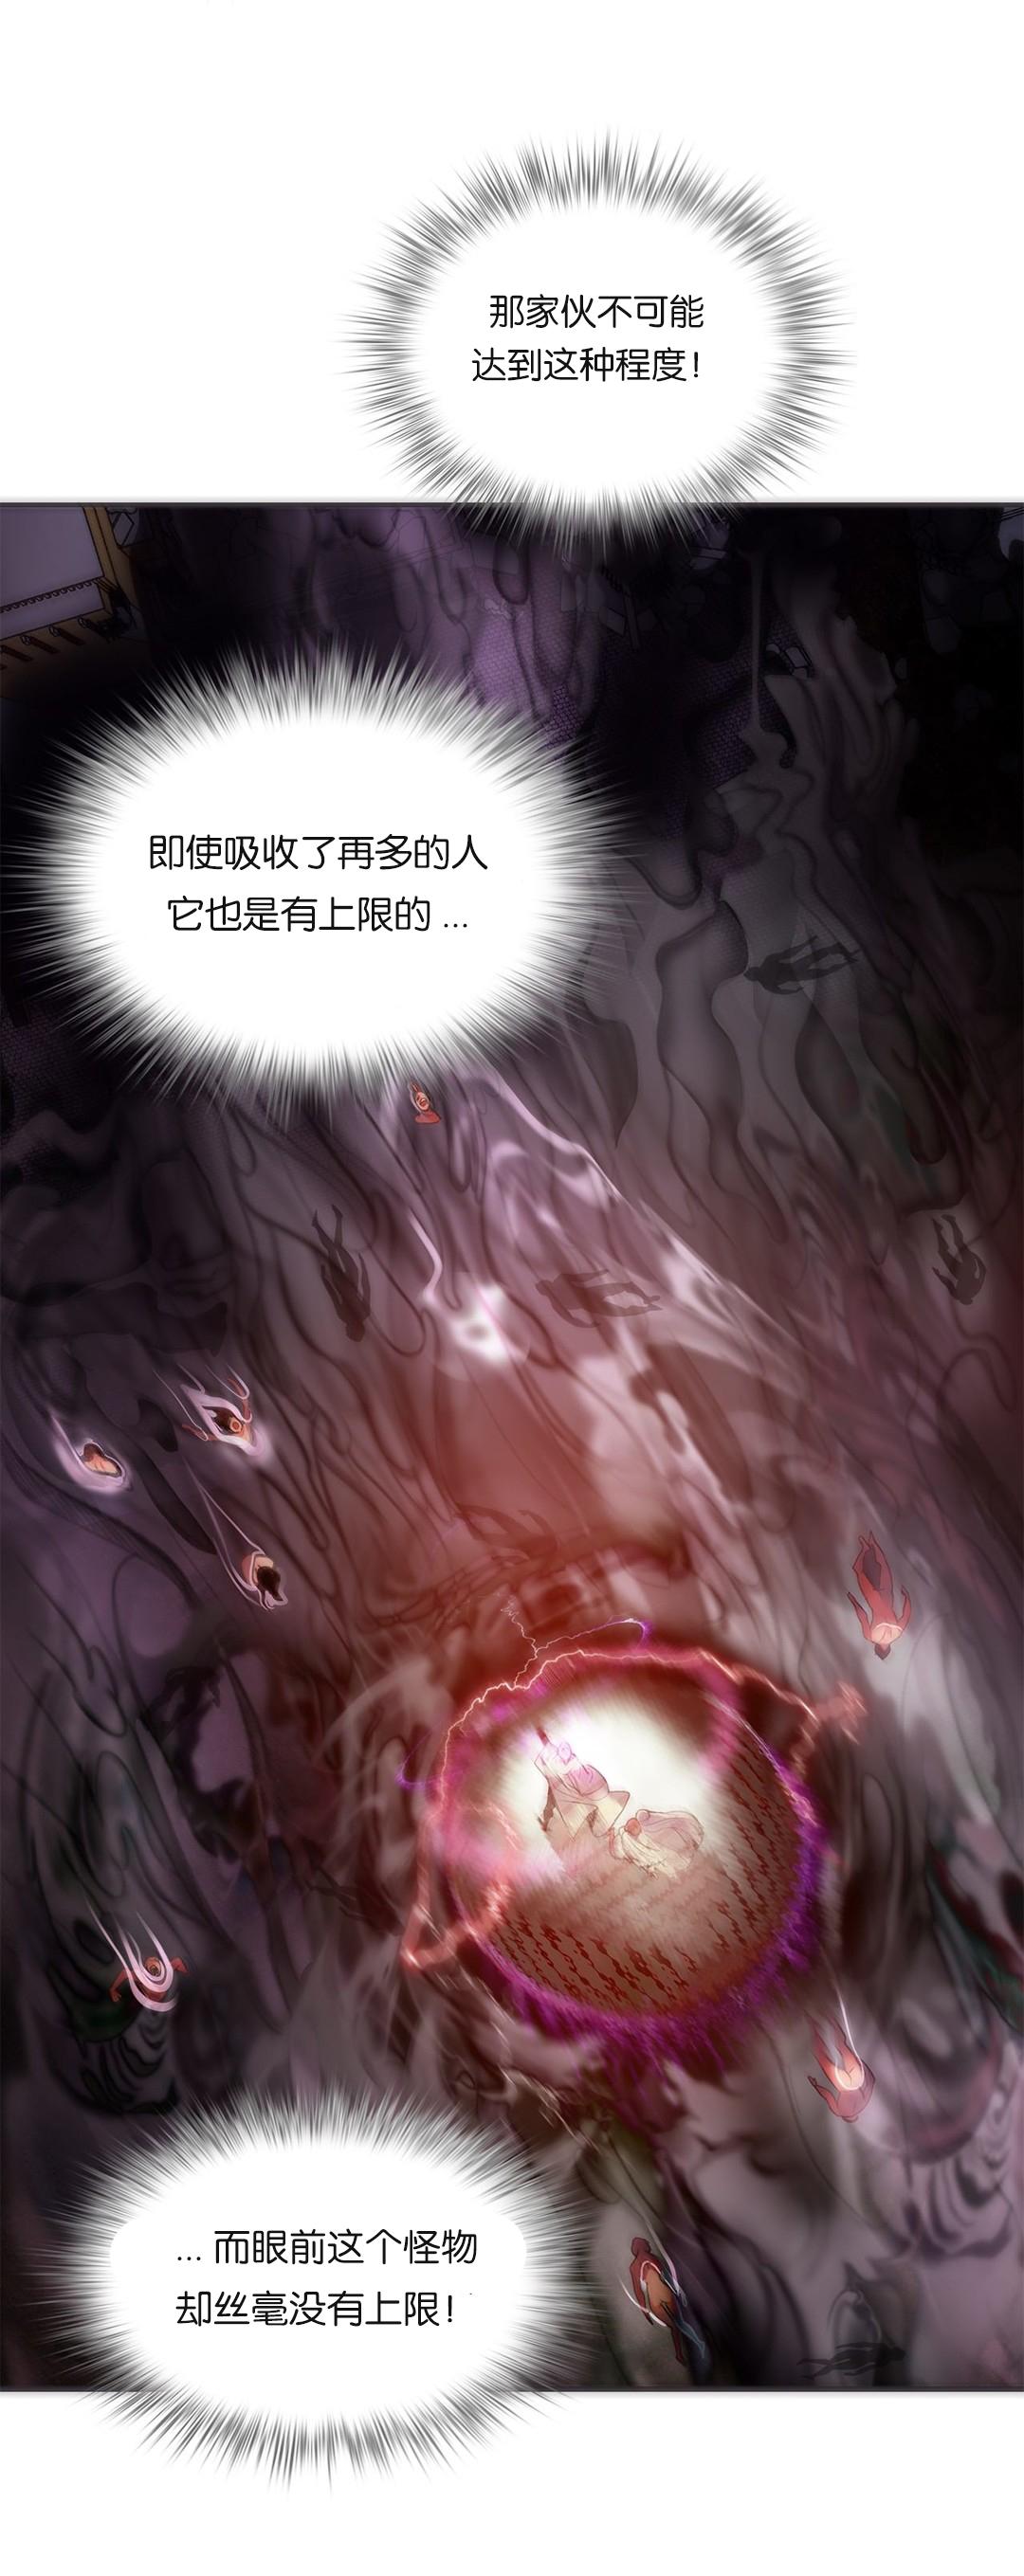 [Juder] Lilith`s Cord (第二季) Ch.61-67 [Chinese] [aaatwist个人汉化] [Ongoing] 21